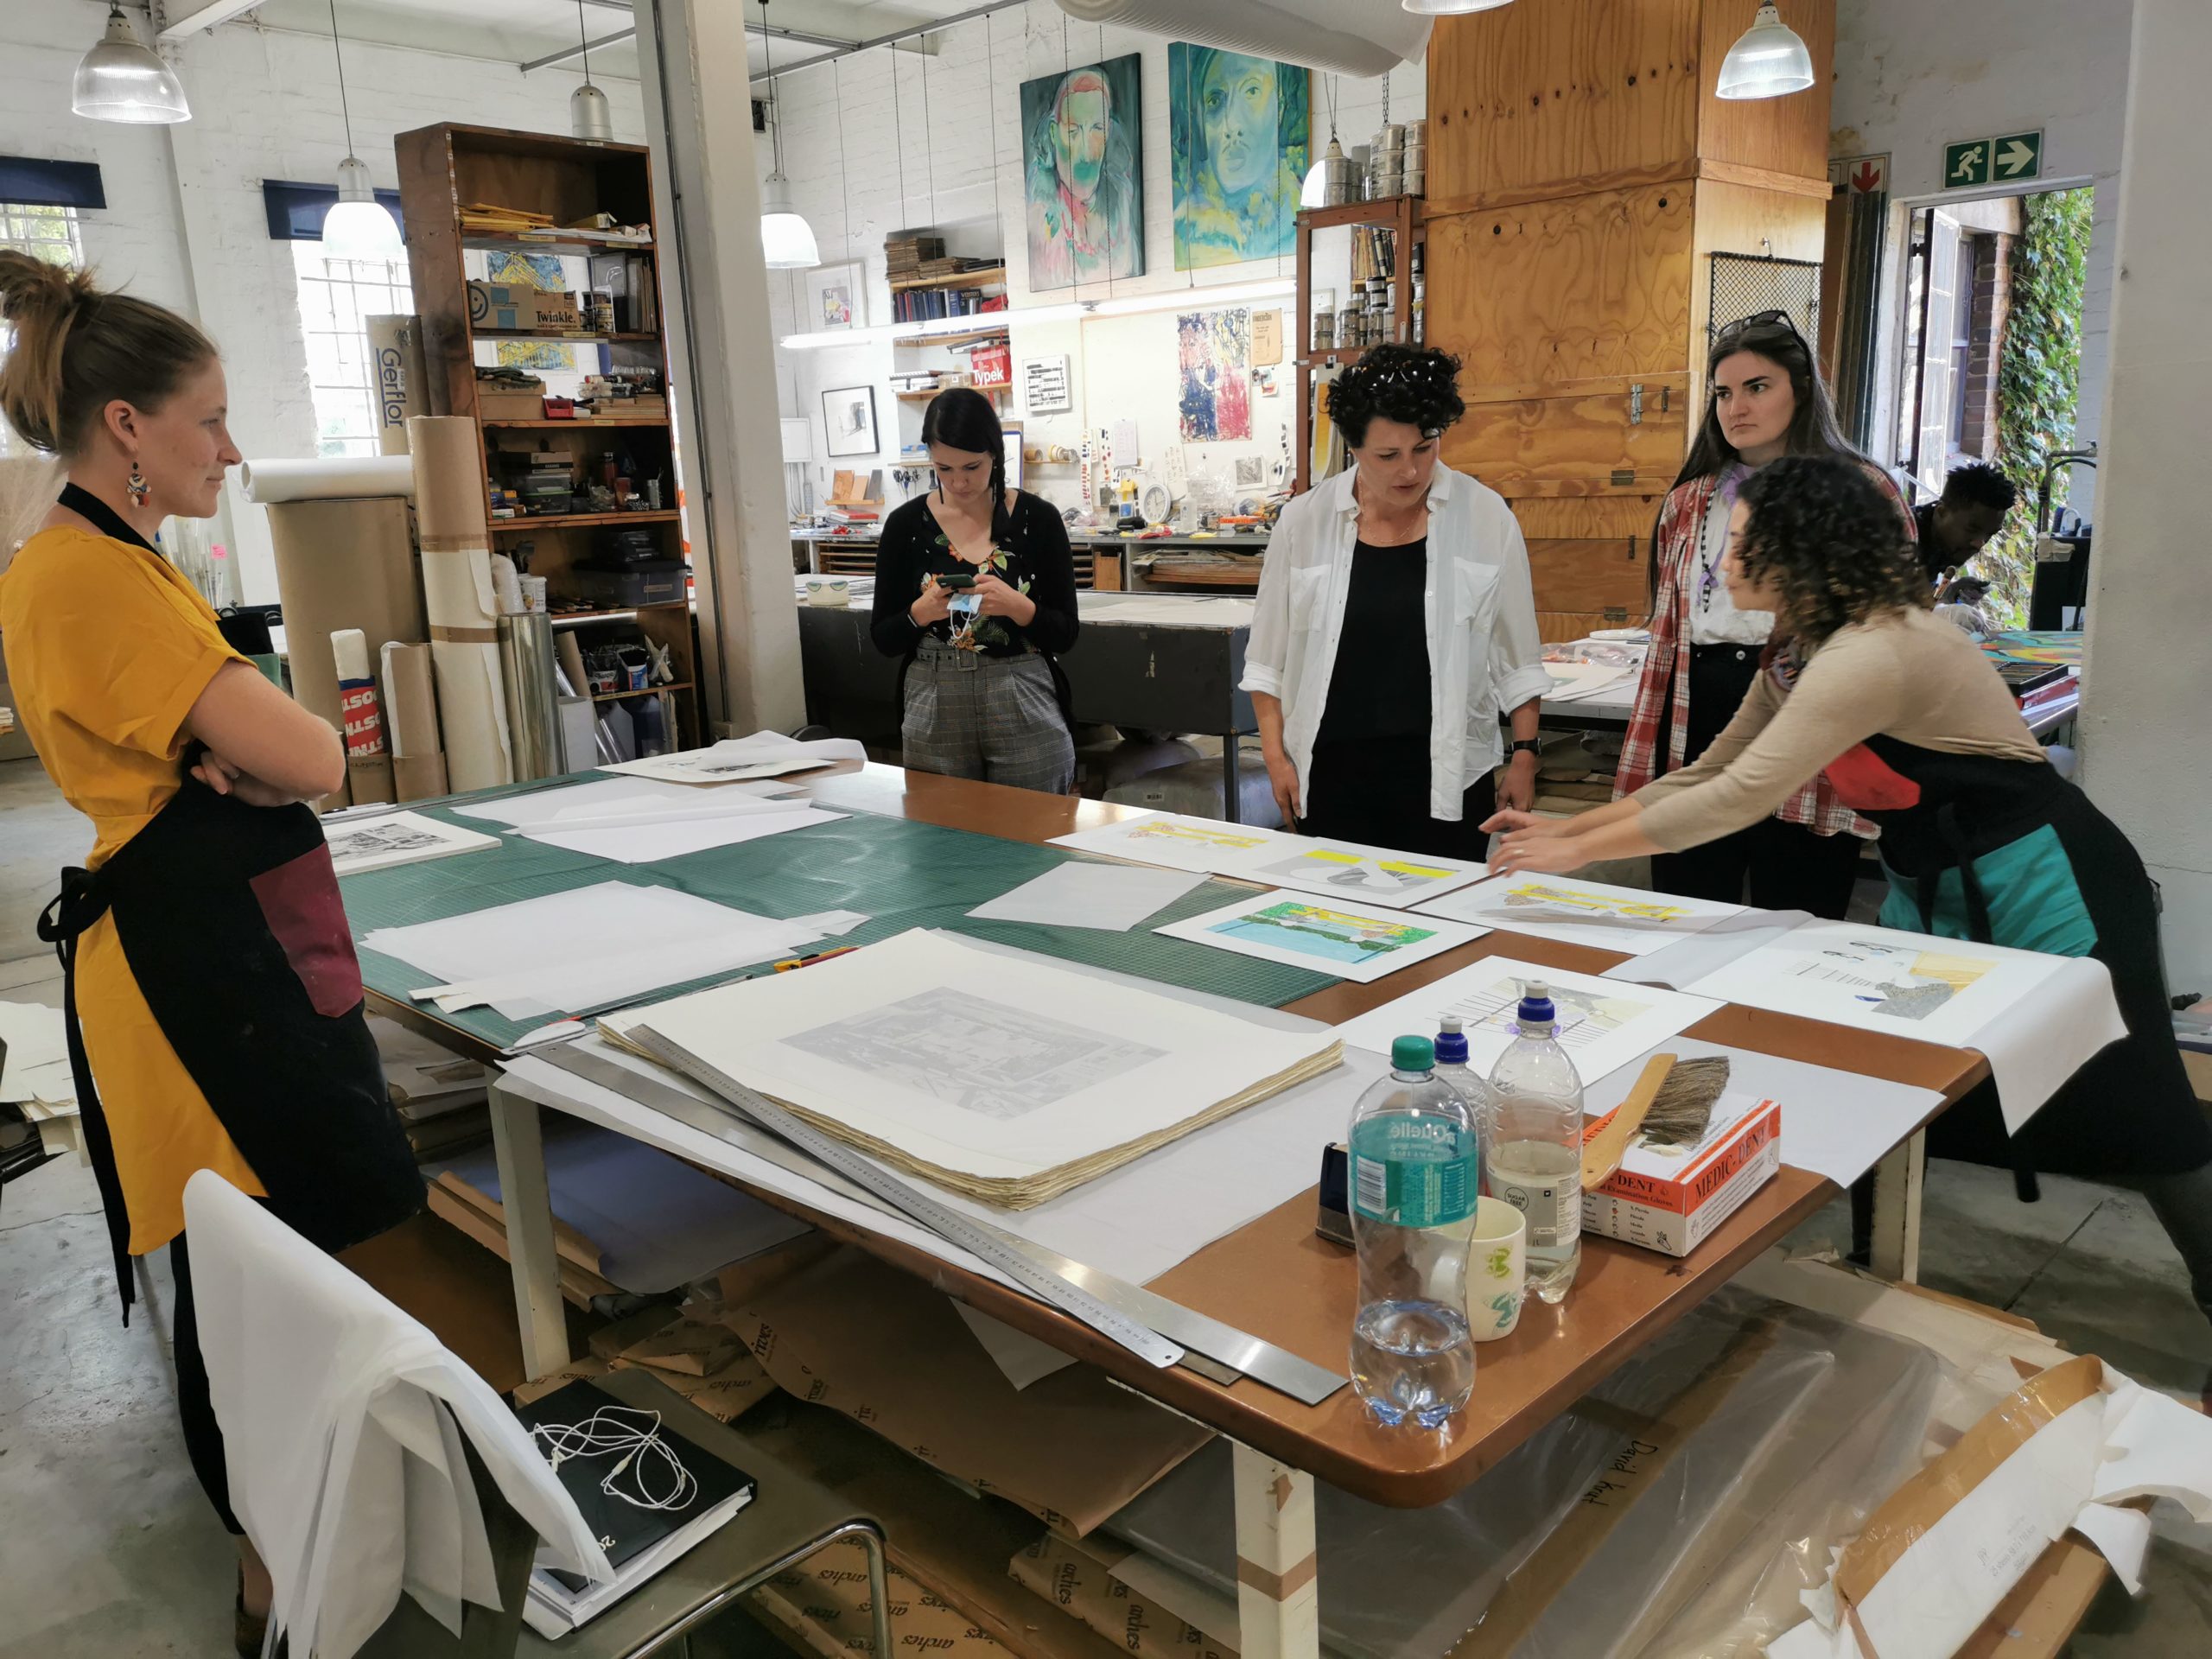 Looking at Matty Monethi's works with the team (from left: Sarah Judge, Amé Bell, Anthea Buys, Melissa Waters, Kim-Lee Loggenberg)